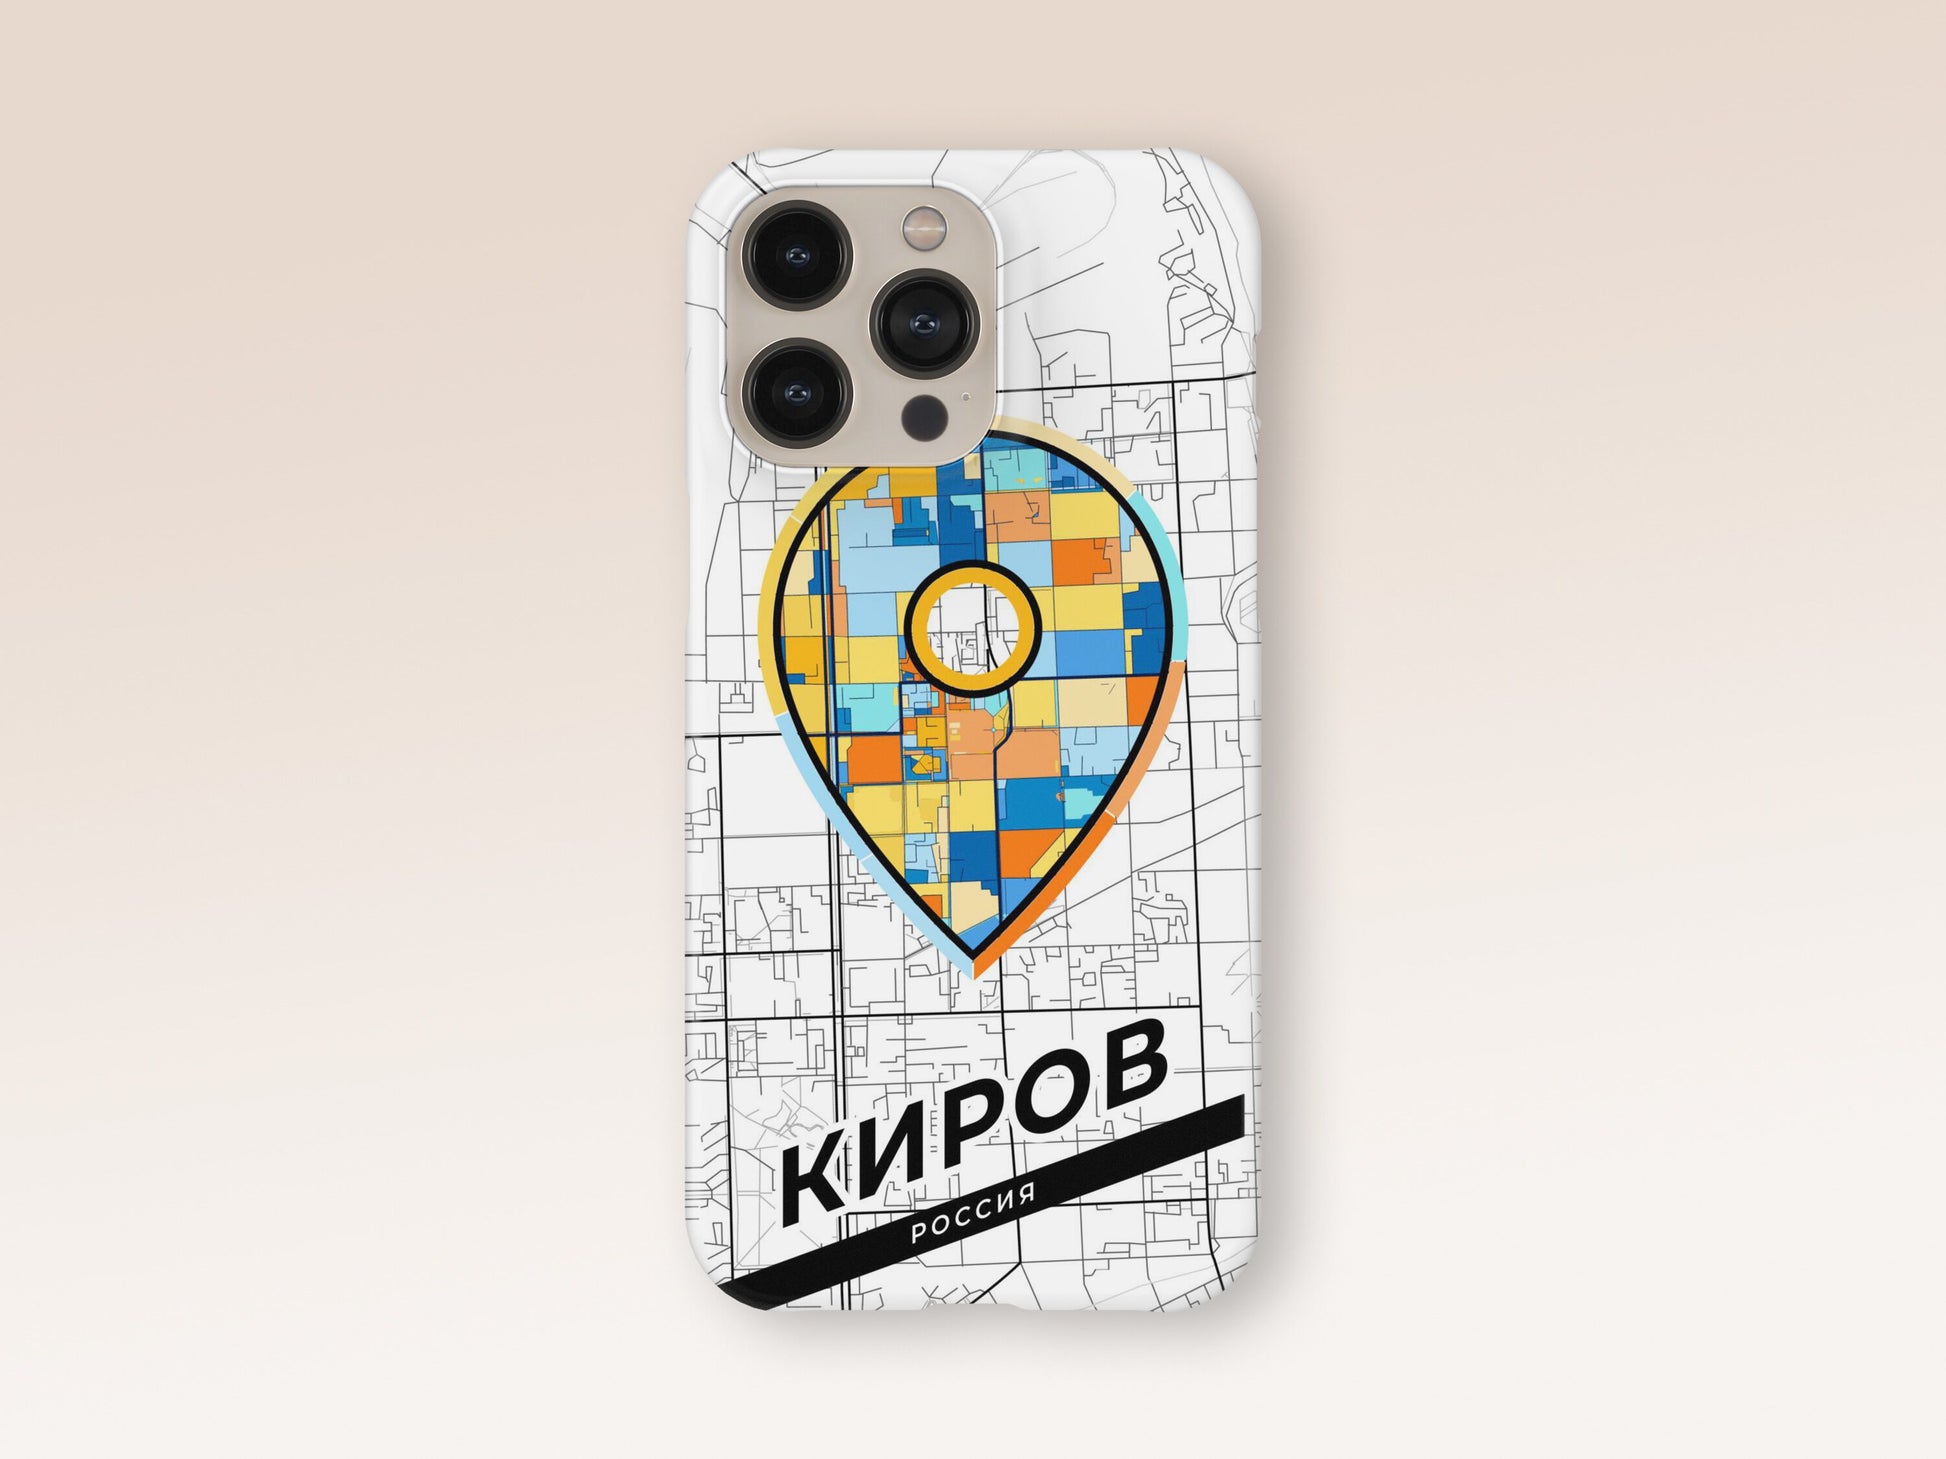 Kirov Russia slim phone case with colorful icon. Birthday, wedding or housewarming gift. Couple match cases. 1